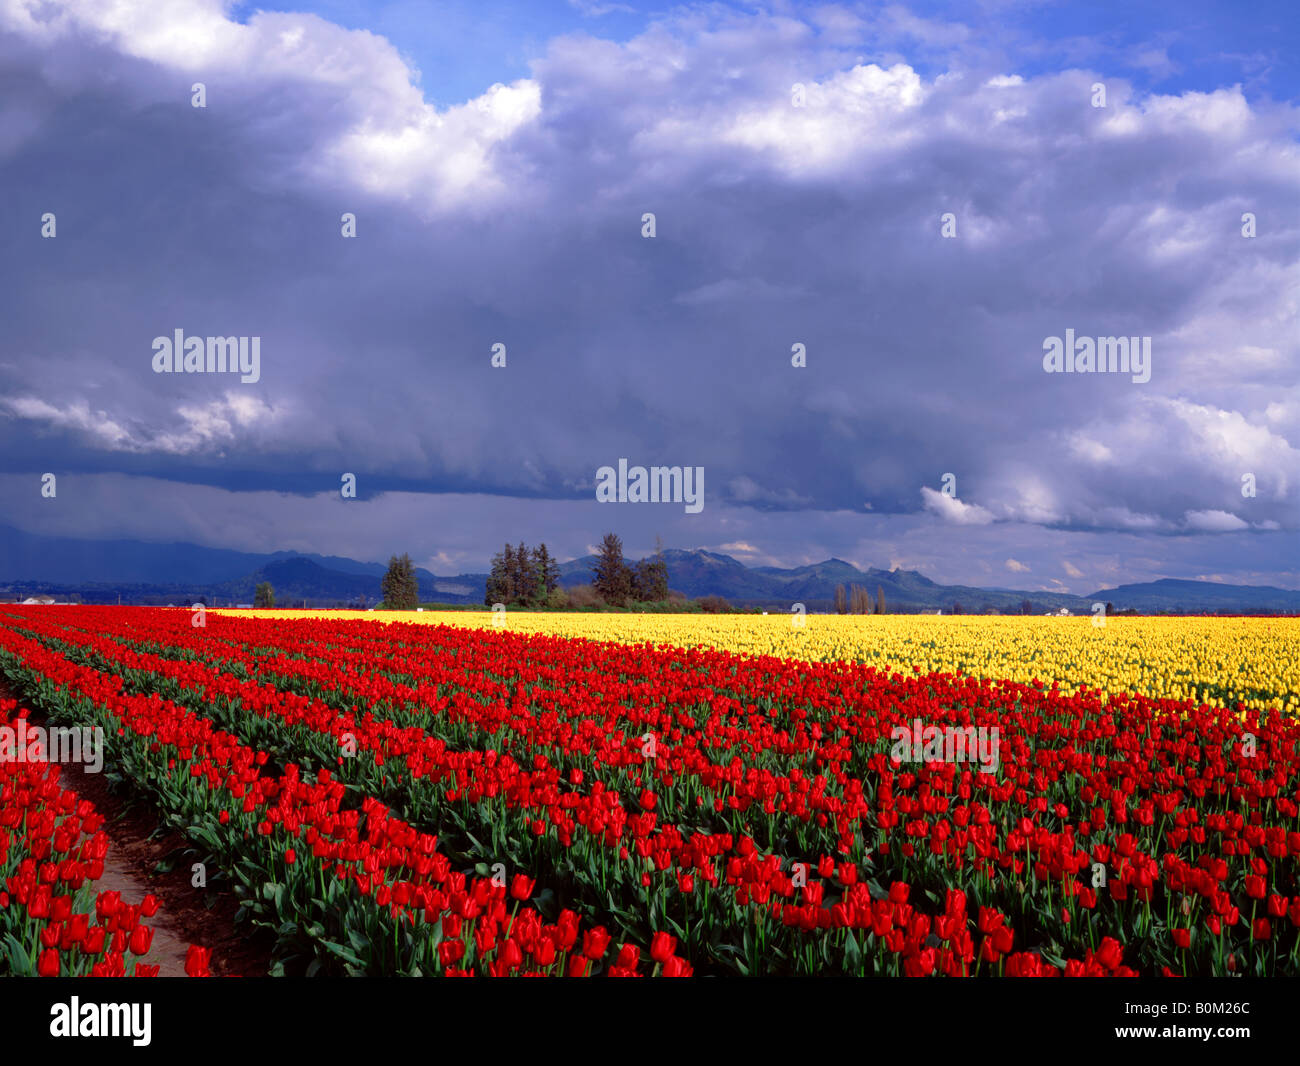 Rows of red and yellow tulips under stormy skies Stock Photo